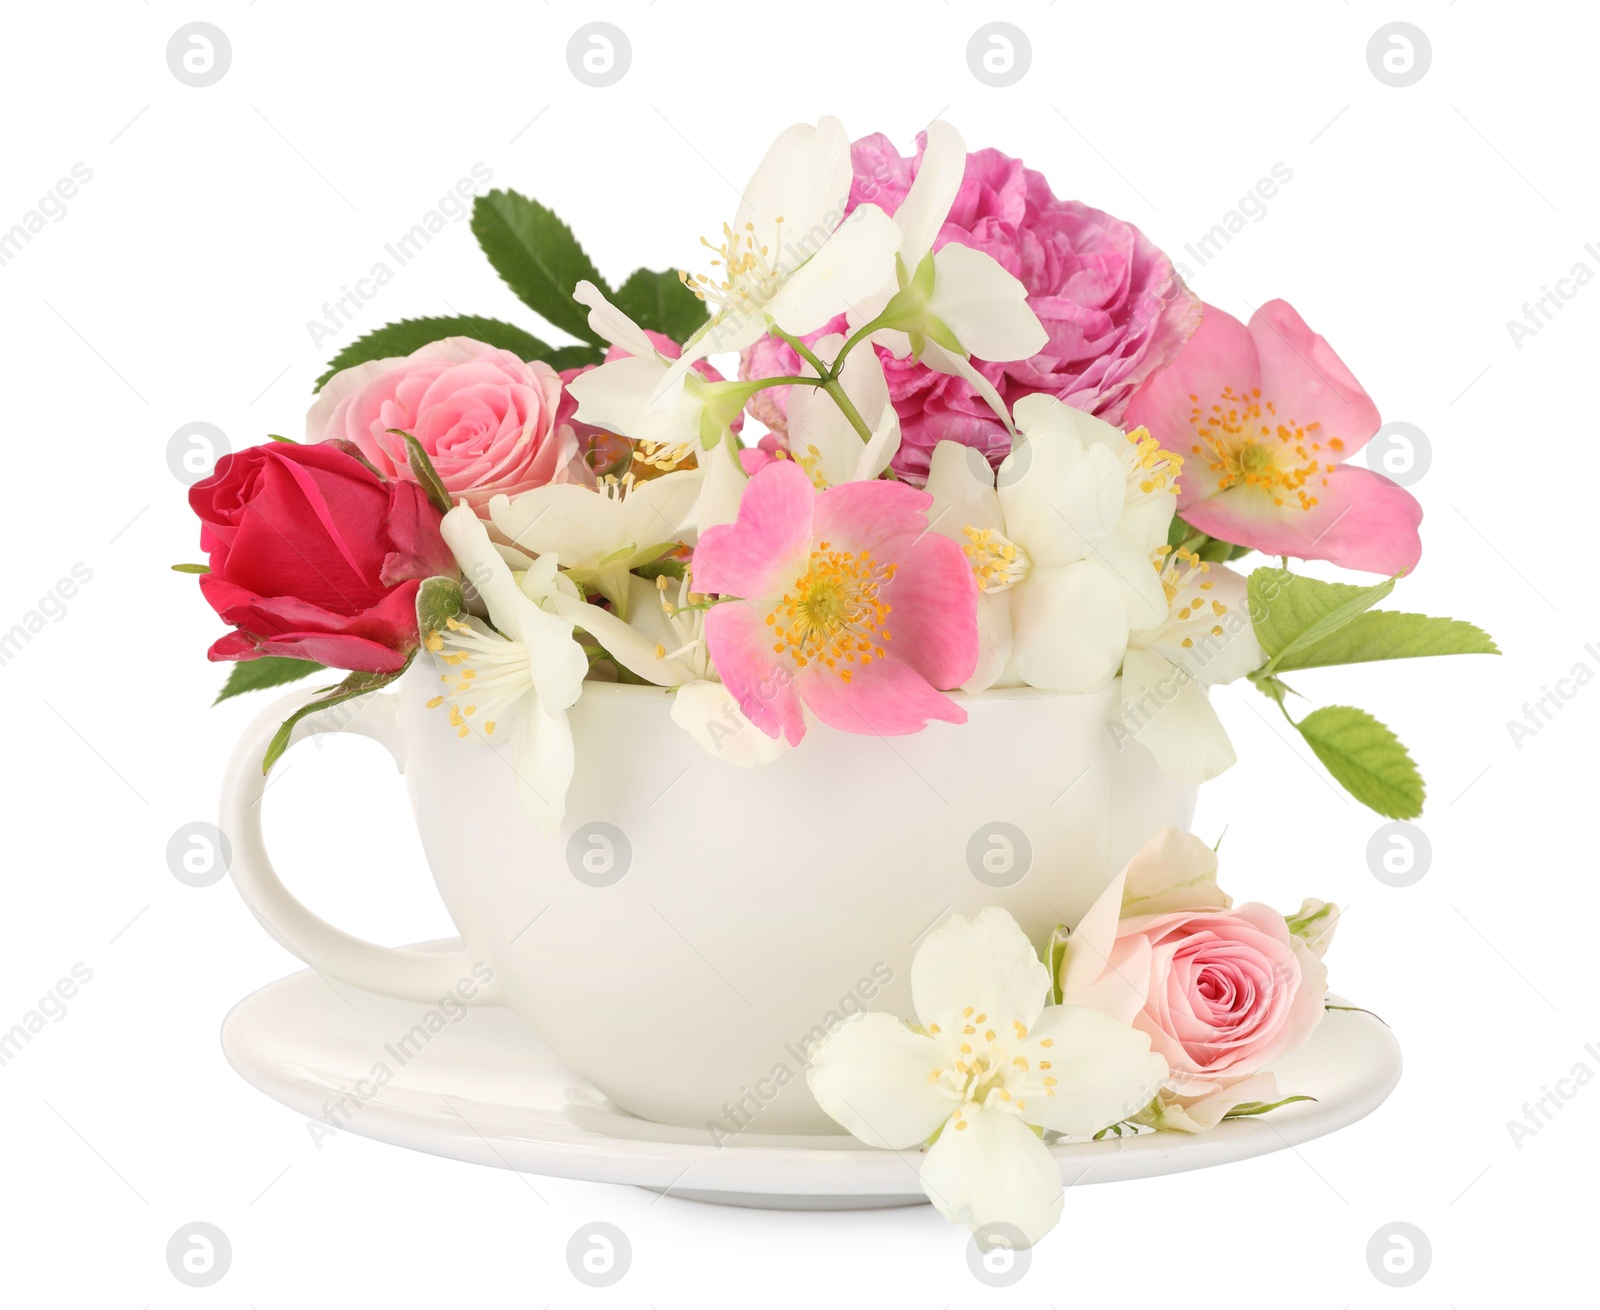 Photo of Aromatic herbal tea in cup with different flowers isolated on white